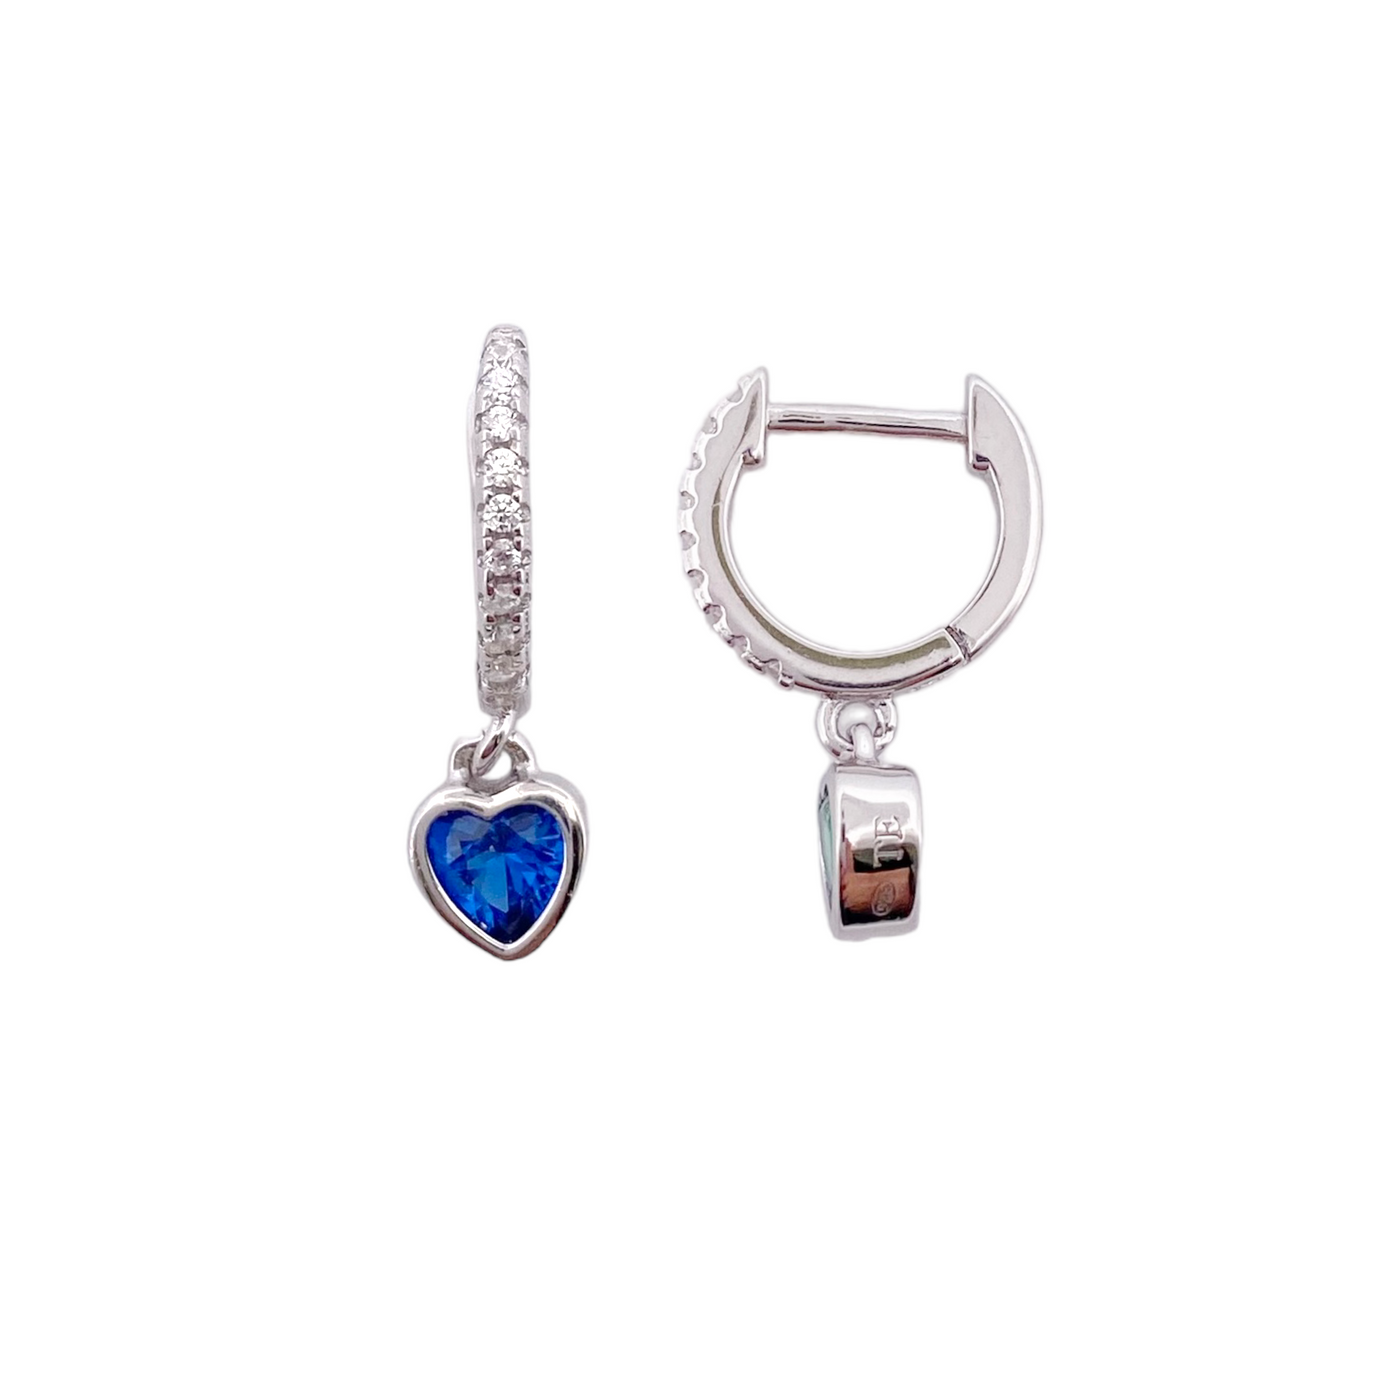 SILVER EARRINGS WITH HEART CHARM